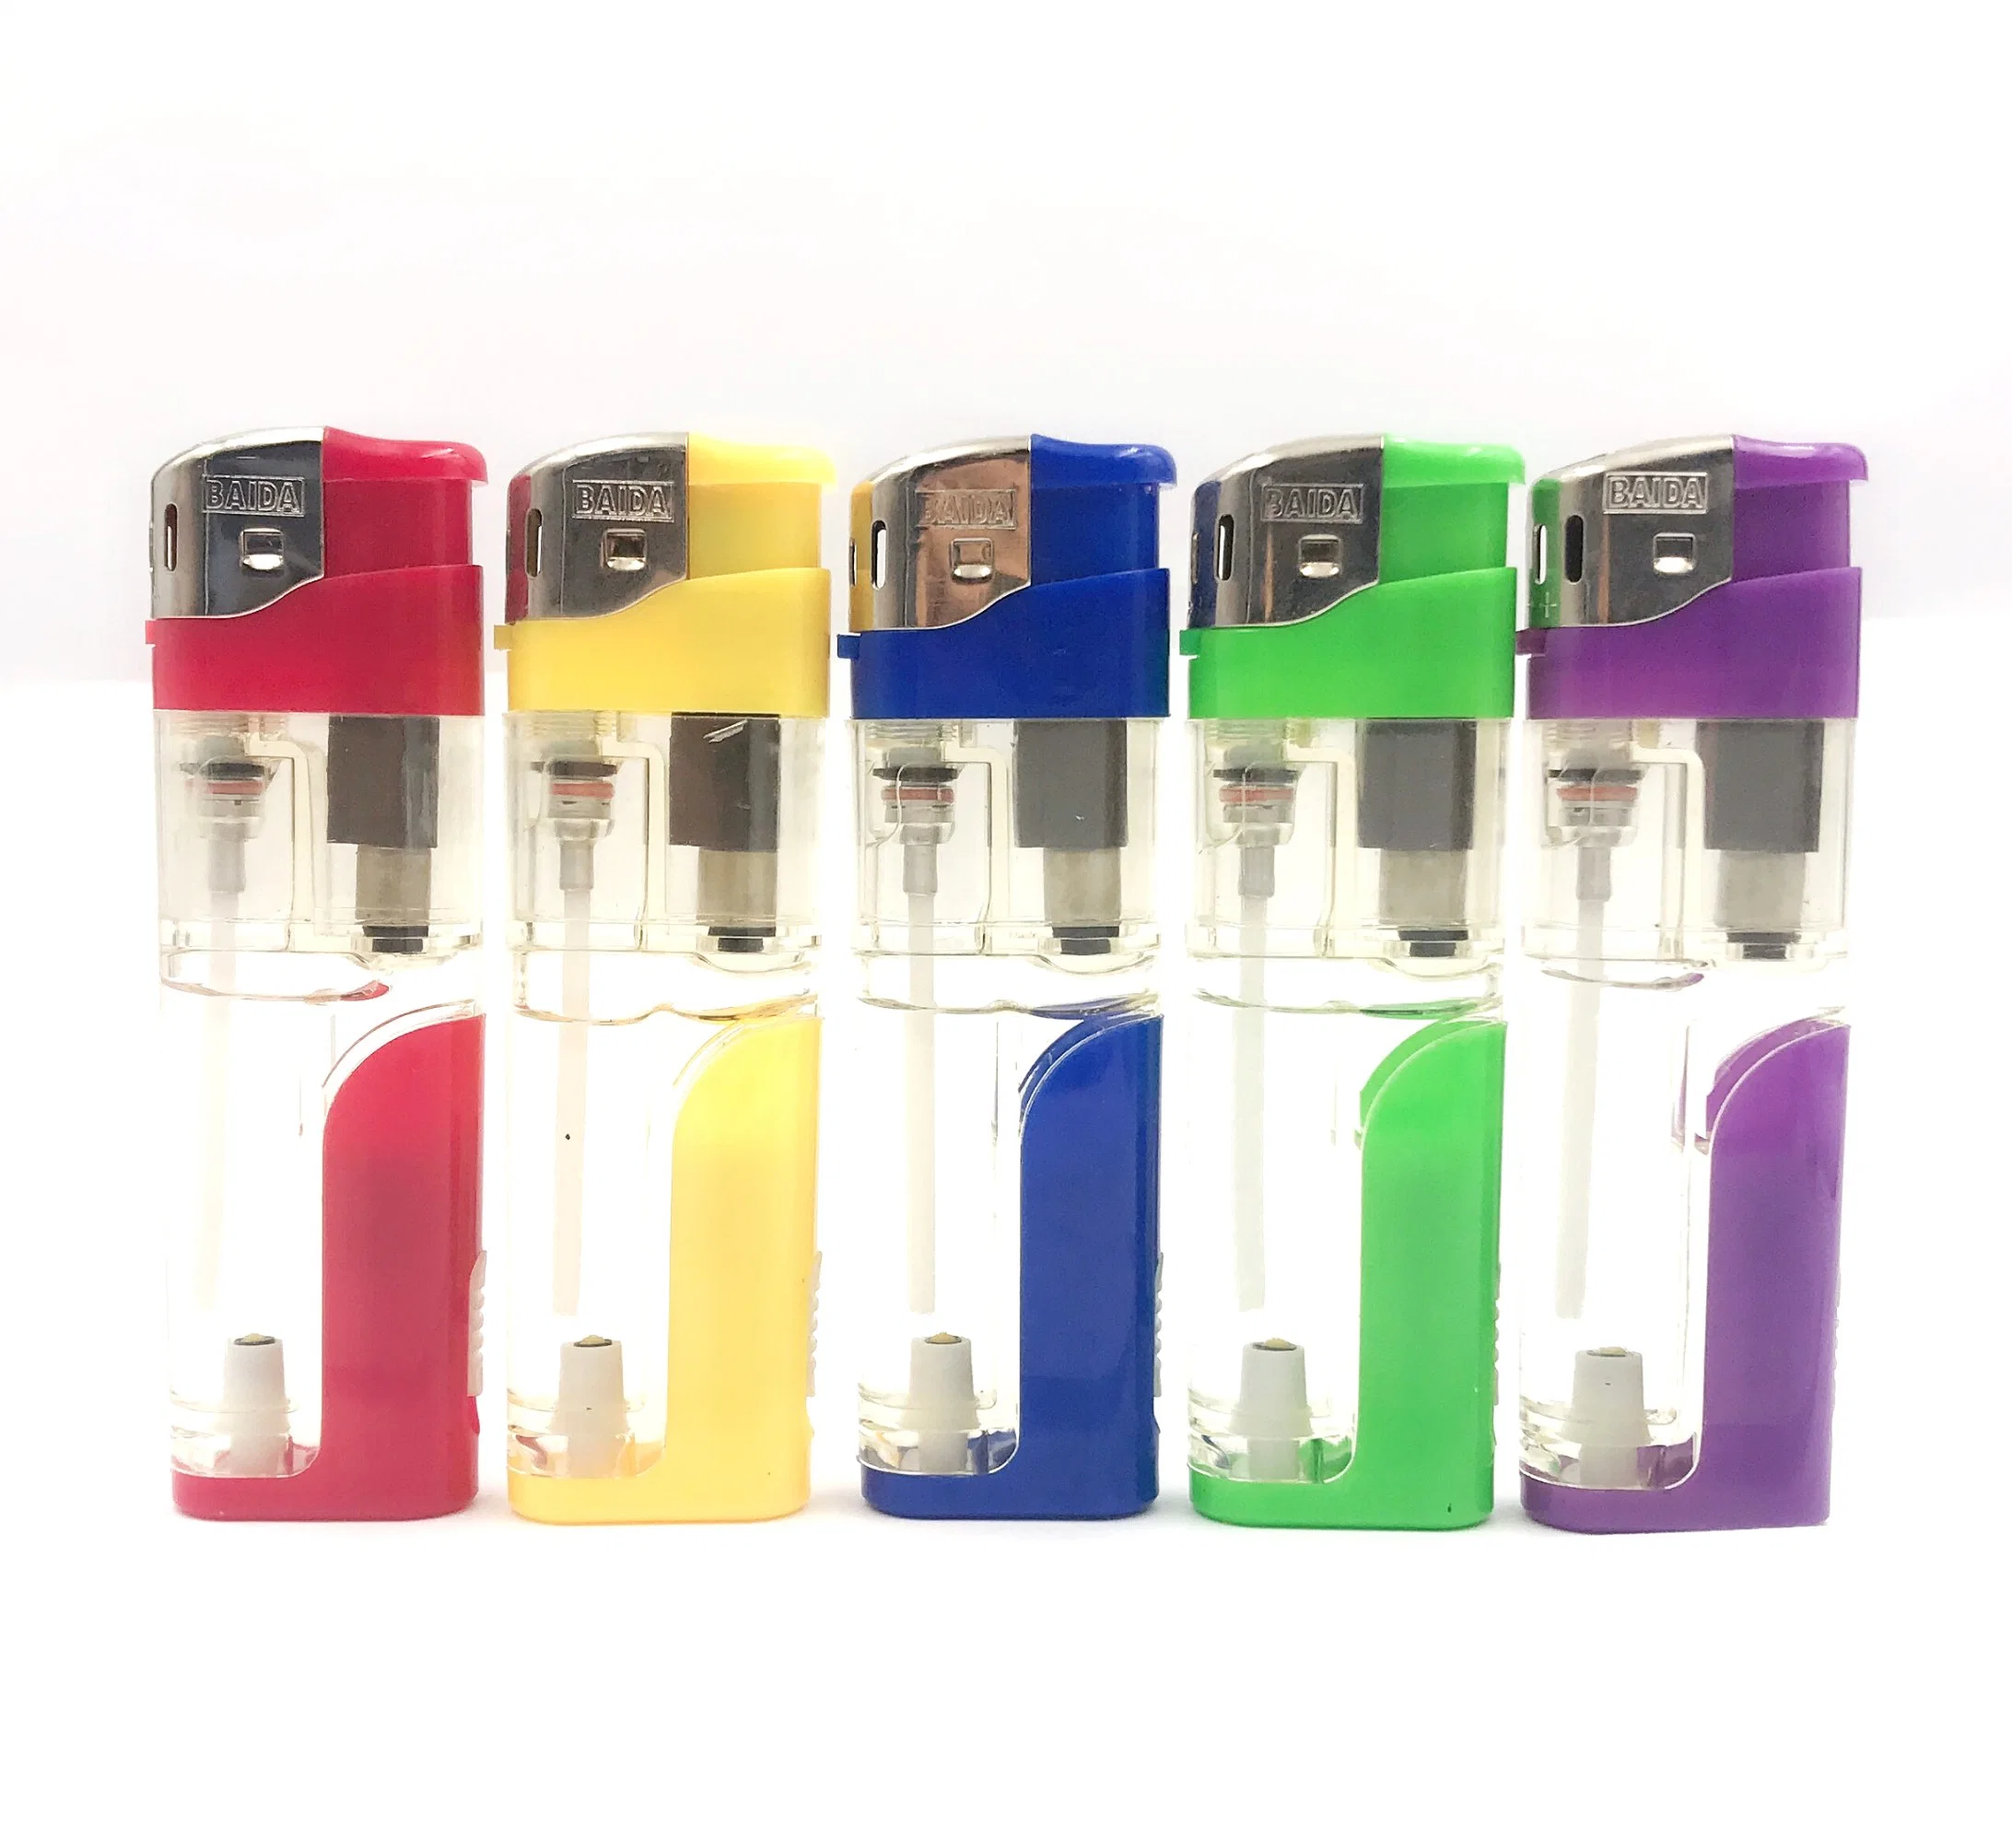 8.0cm Refillable Electronic Plastic Lighter with LED